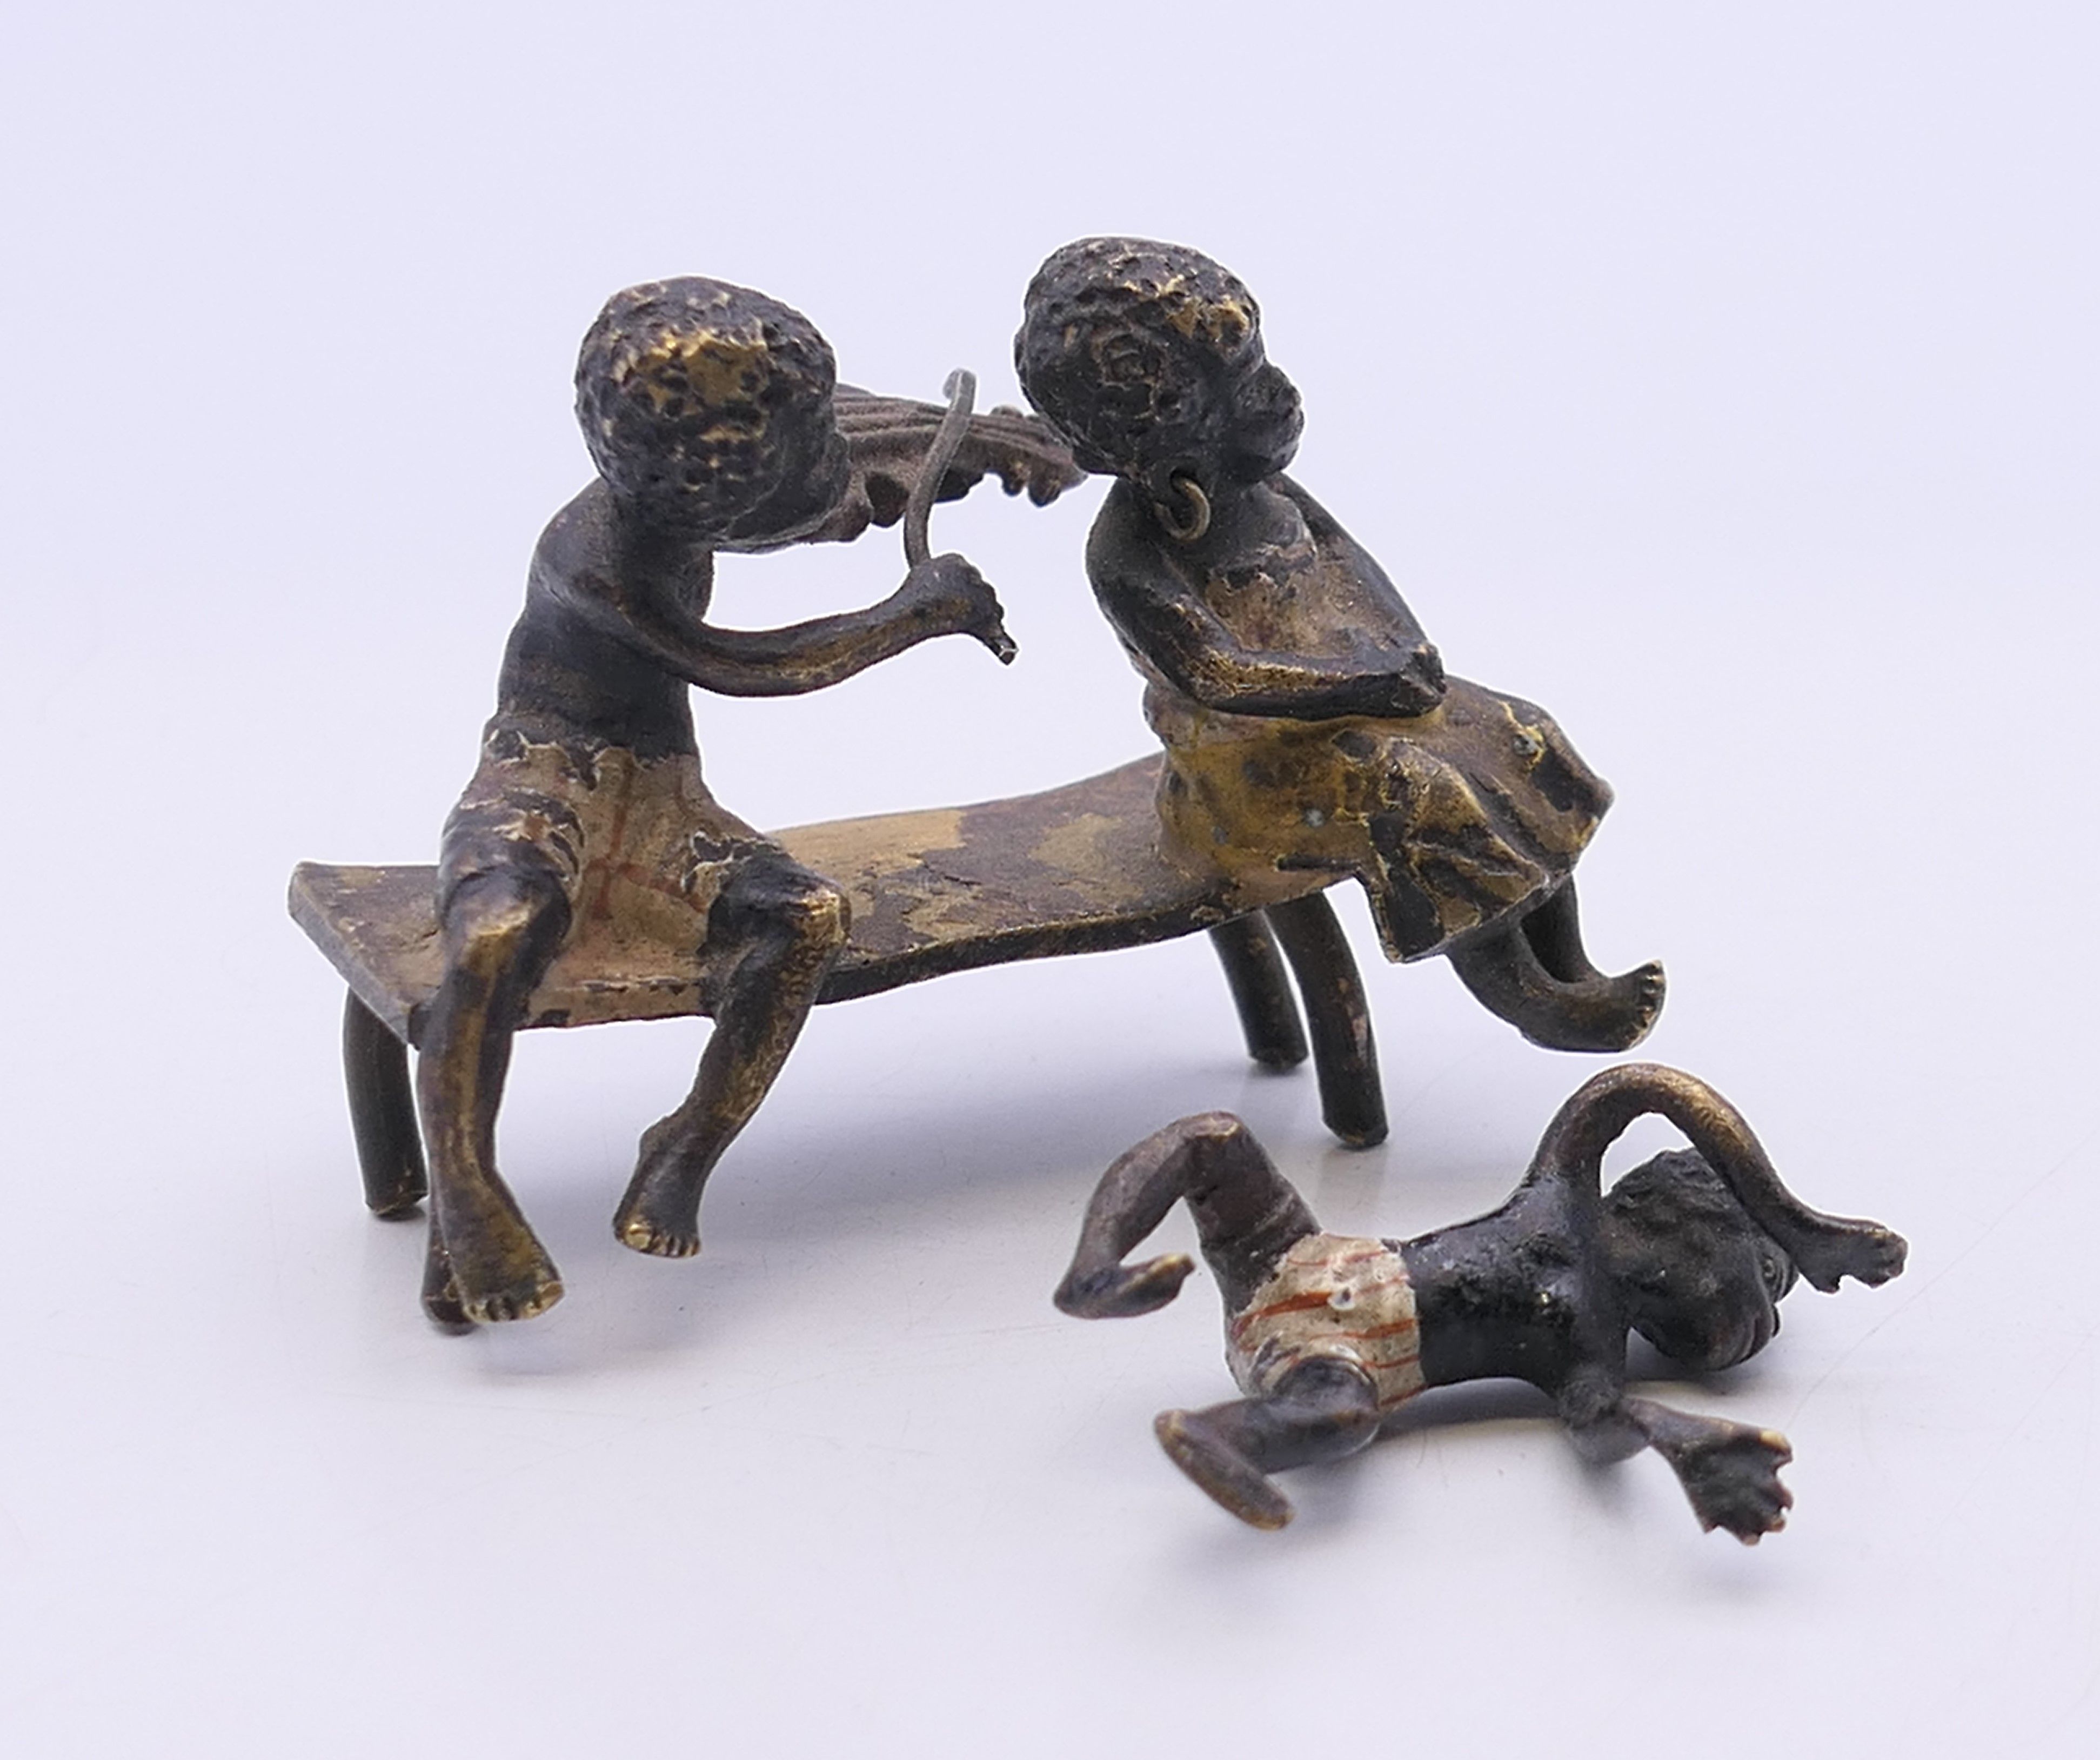 A 19th century Austrian cold painted bronze model formed as two figures seated on a bench,